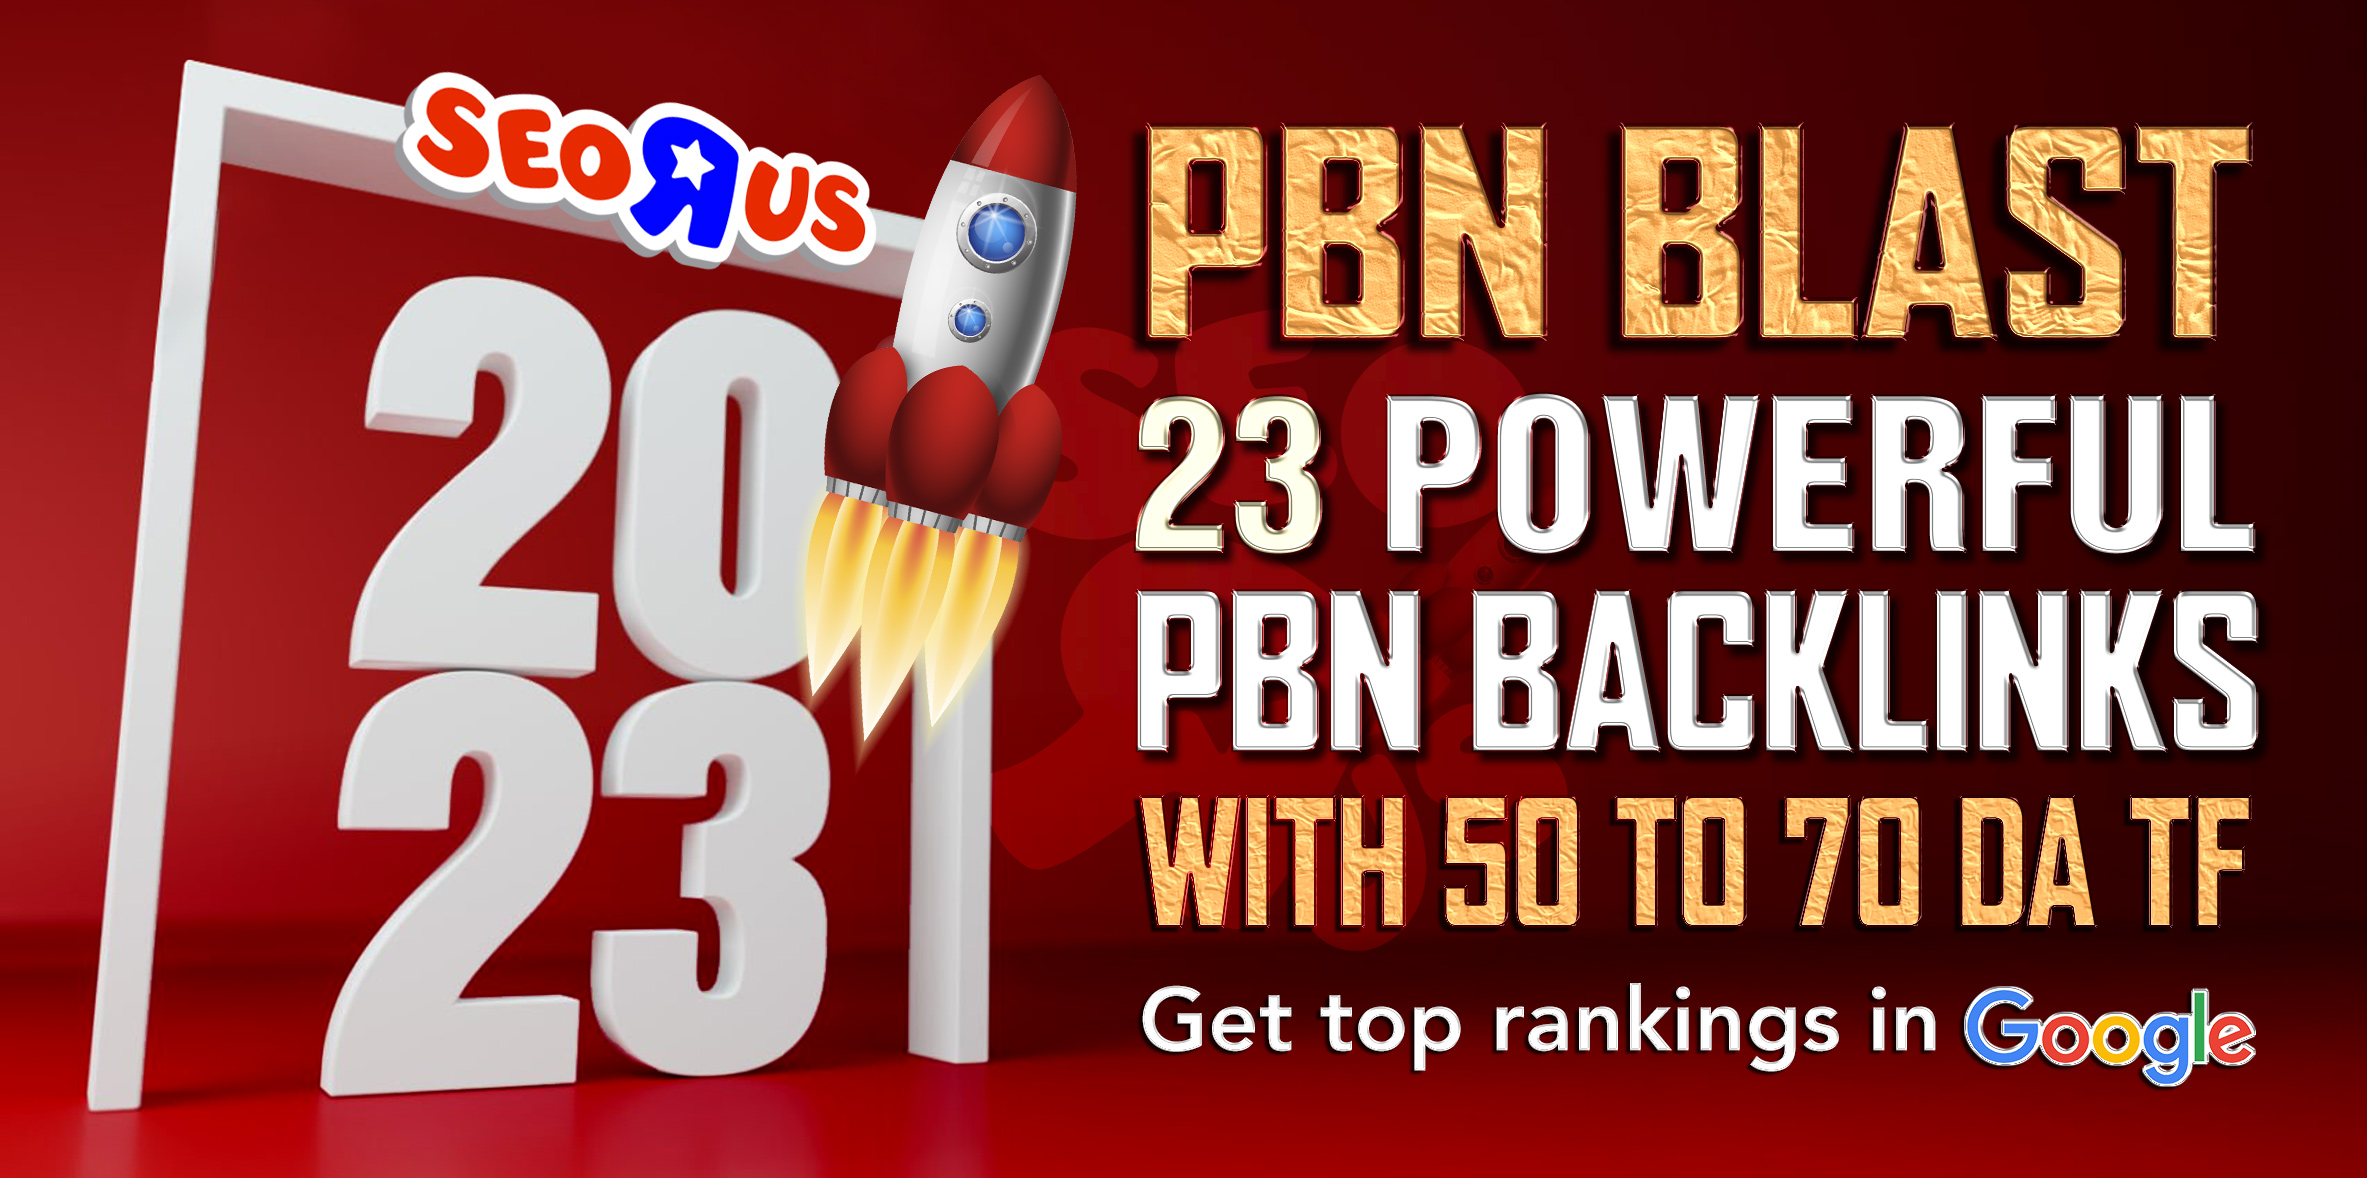 23 Powerful PBN Backlinks With 50 To 70 DA TF, Get top rankings in Google